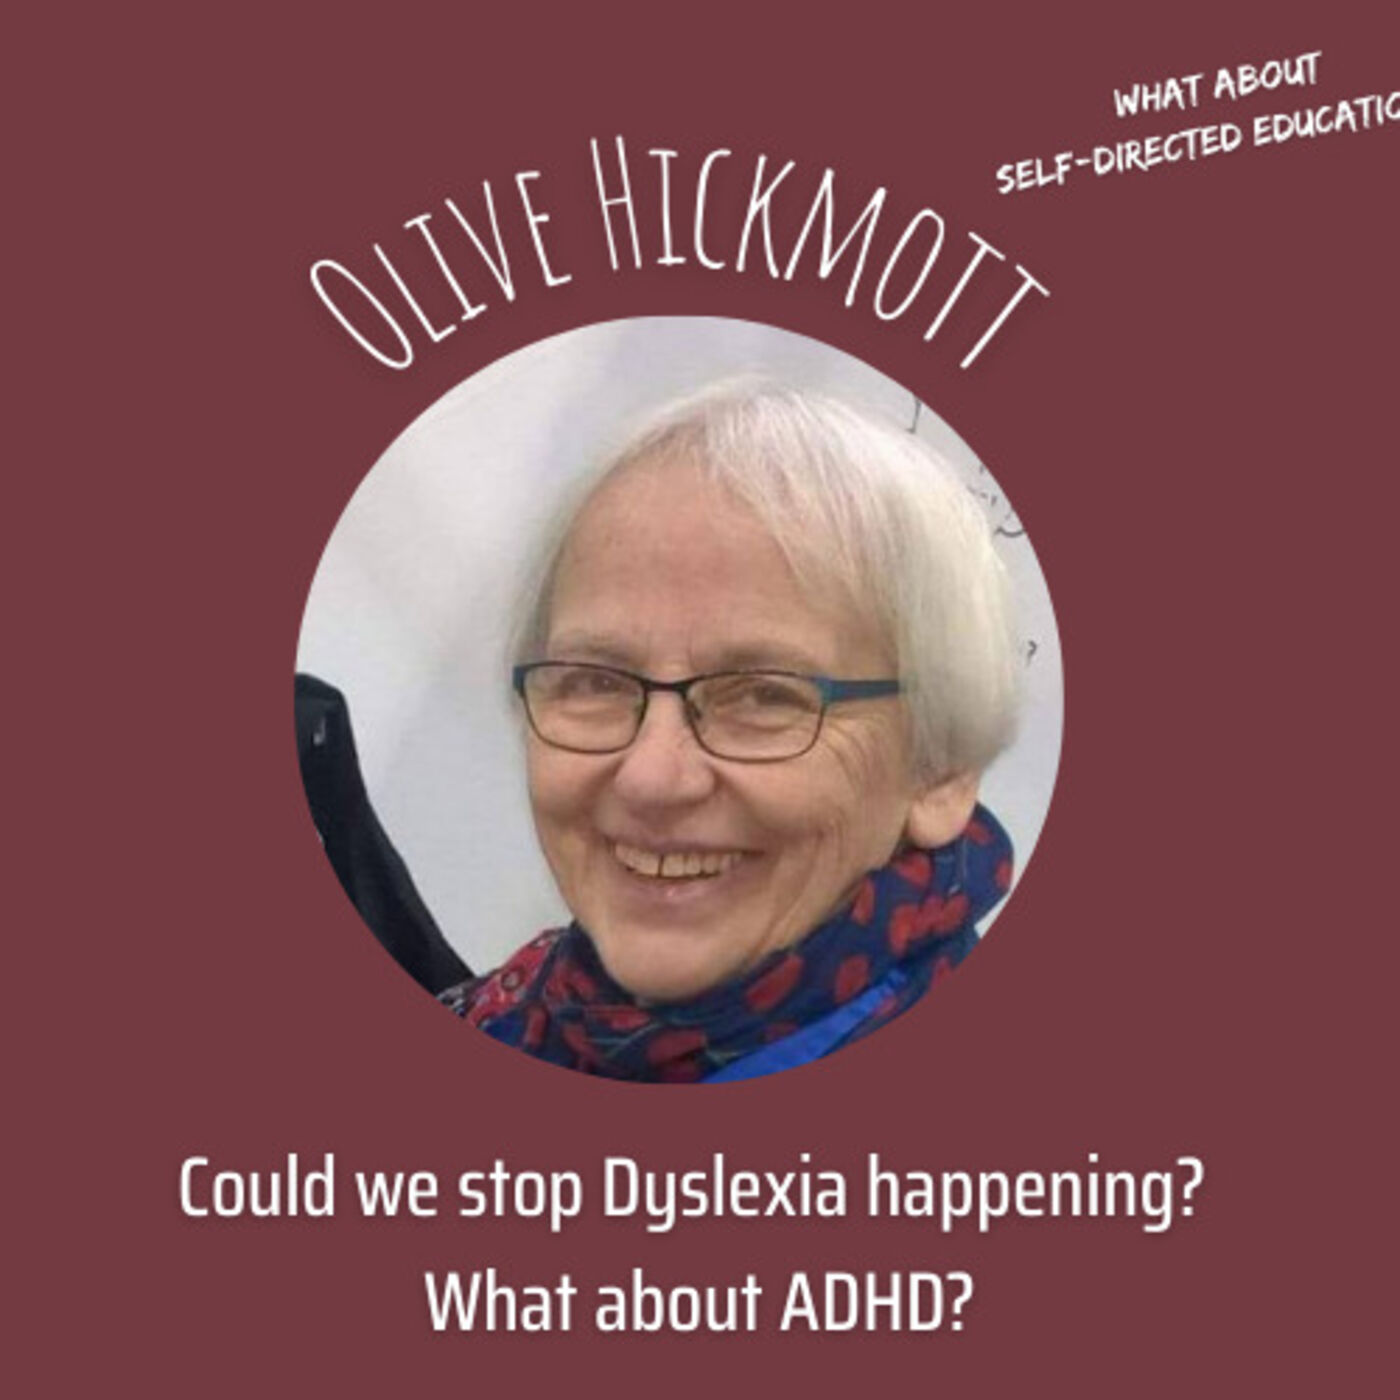 Could we stop Dyslexia happening? What about ADHD? Max Sauber in conversation with Olive Hickmott